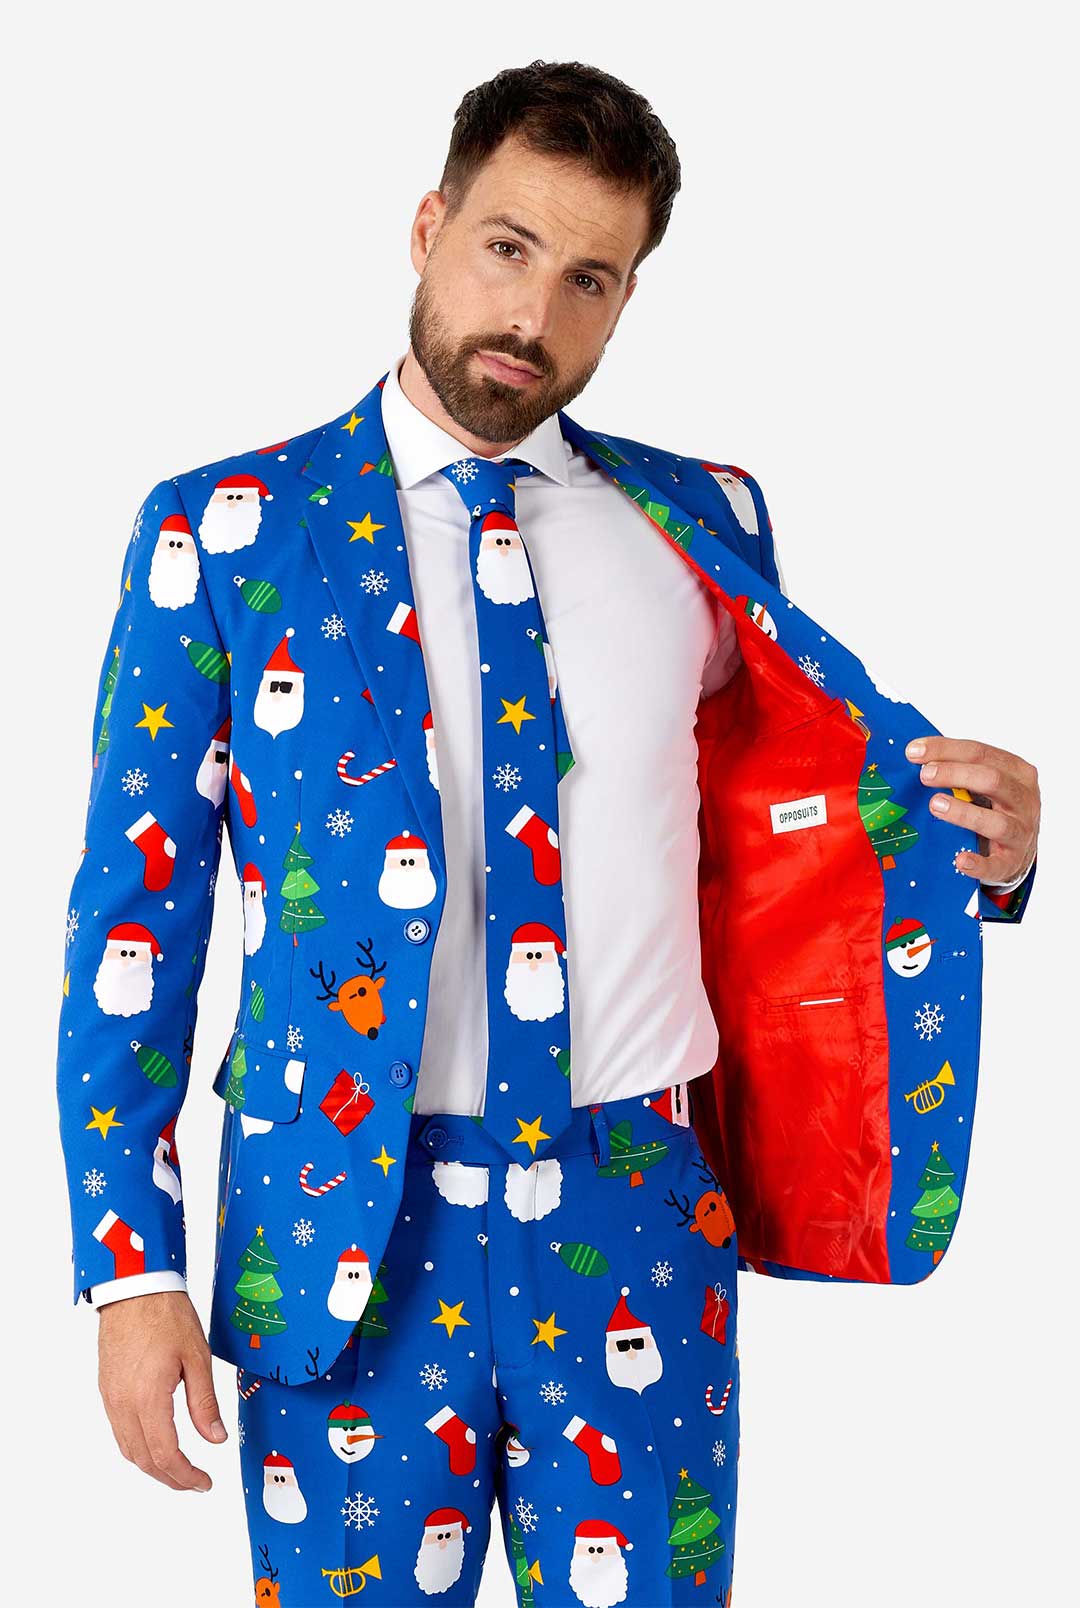 Stylish Red Printed Christmas Suit For Men Two Piece Jacket And Pants Set  With New Look Trouser Suits In Black, Green, And Blue Sizes S 4XL 221201  From Cong03, $49.1 | DHgate.Com